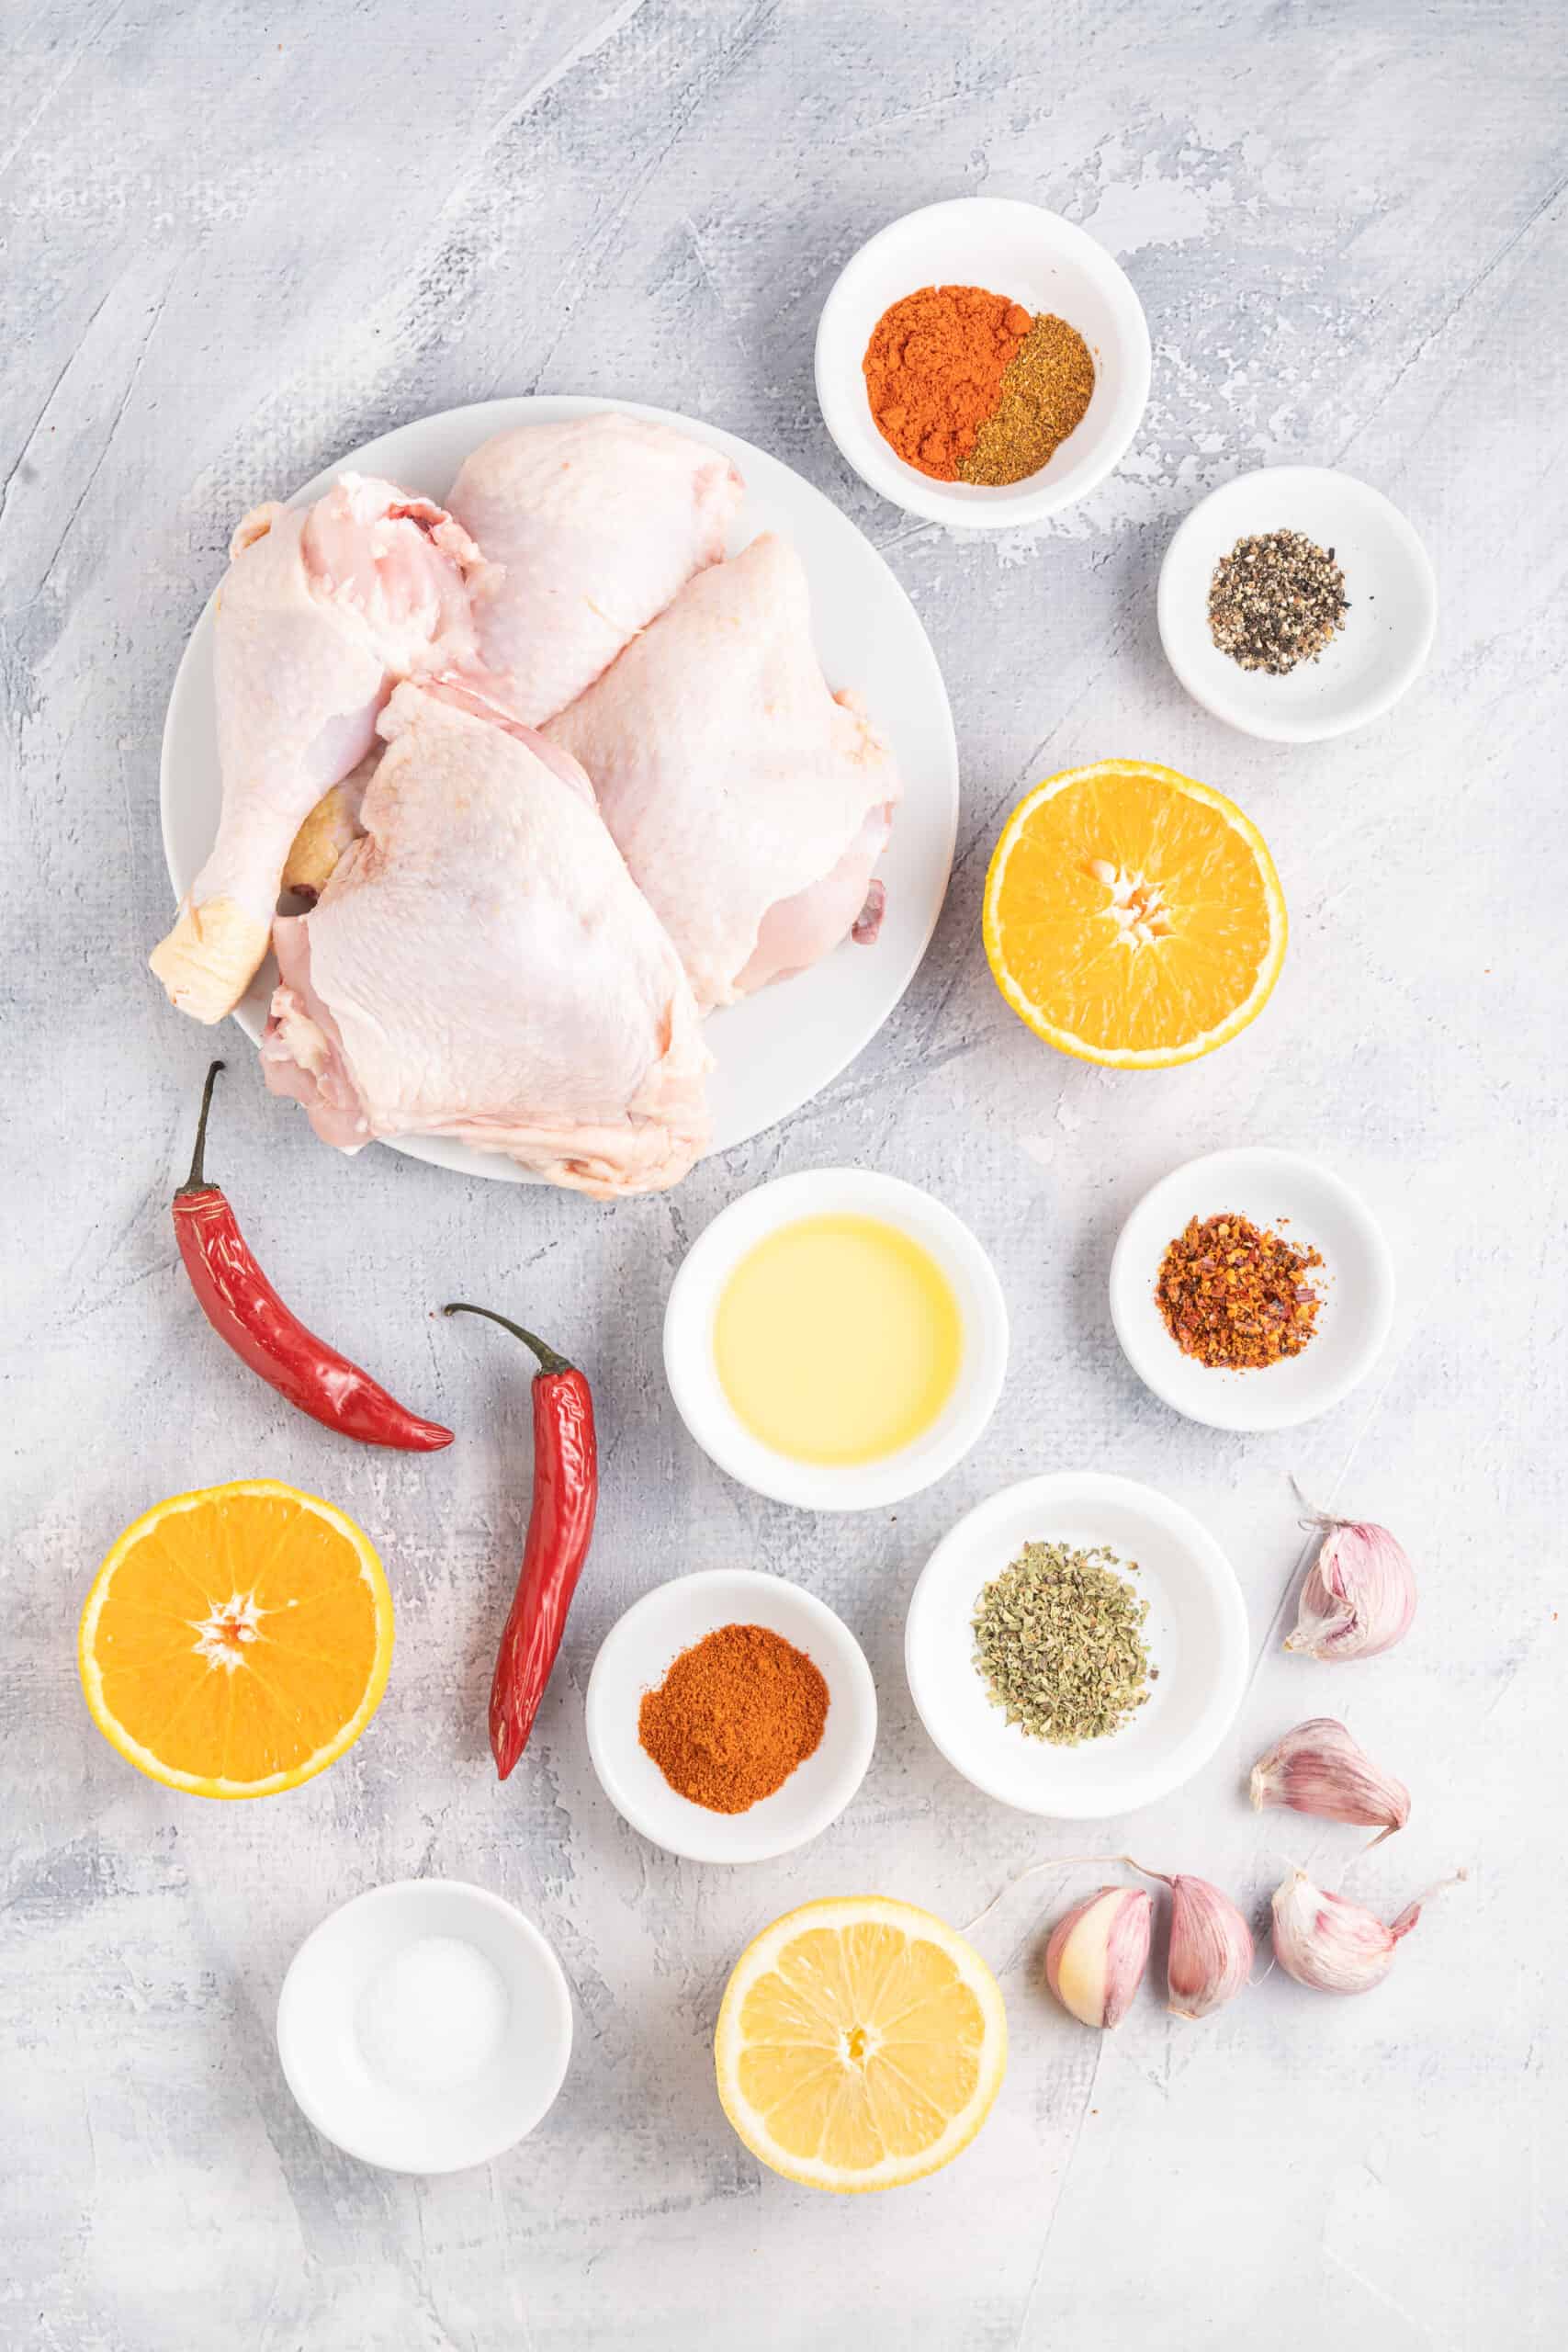 Ingredients for Grilled Peri Peri Chicken